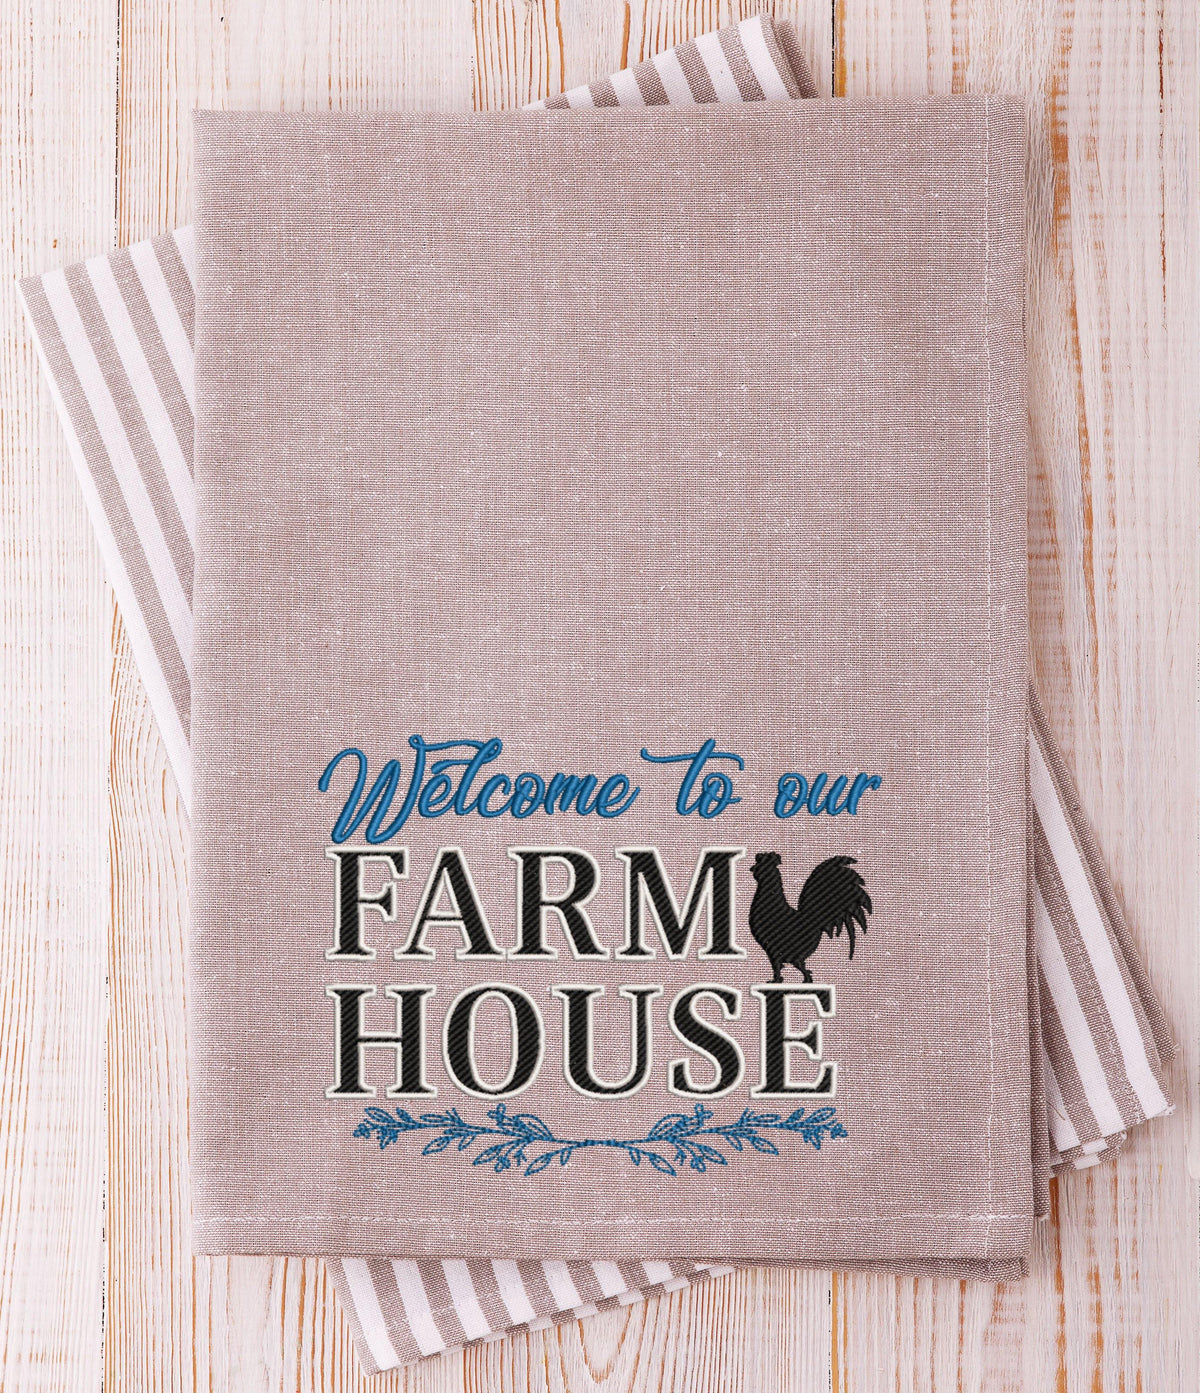 Welcome to our Farm House Embroidery Design - Oh My Crafty Supplies Inc.